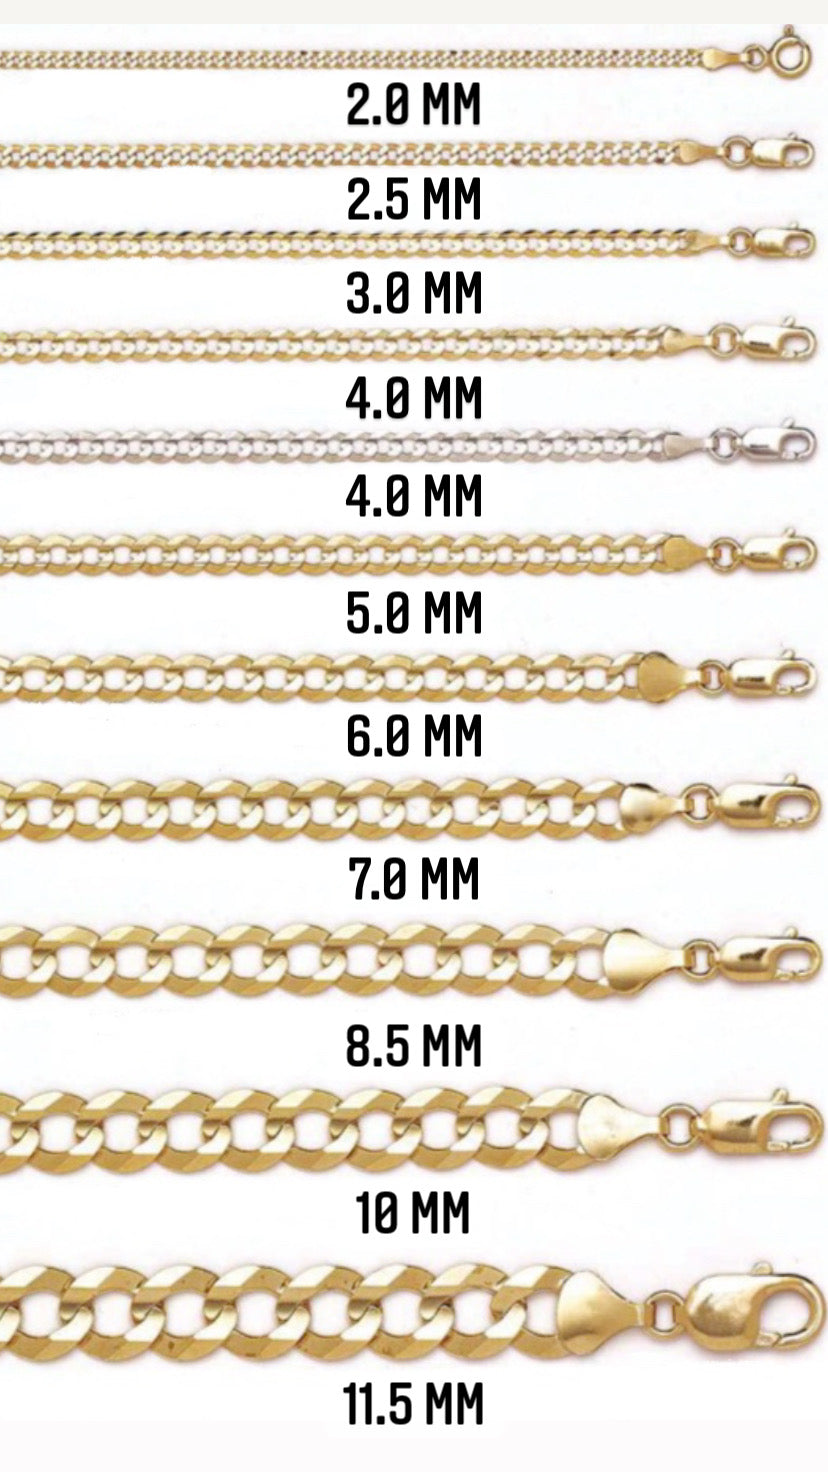 10K Gold- Hollow Figaro Chain